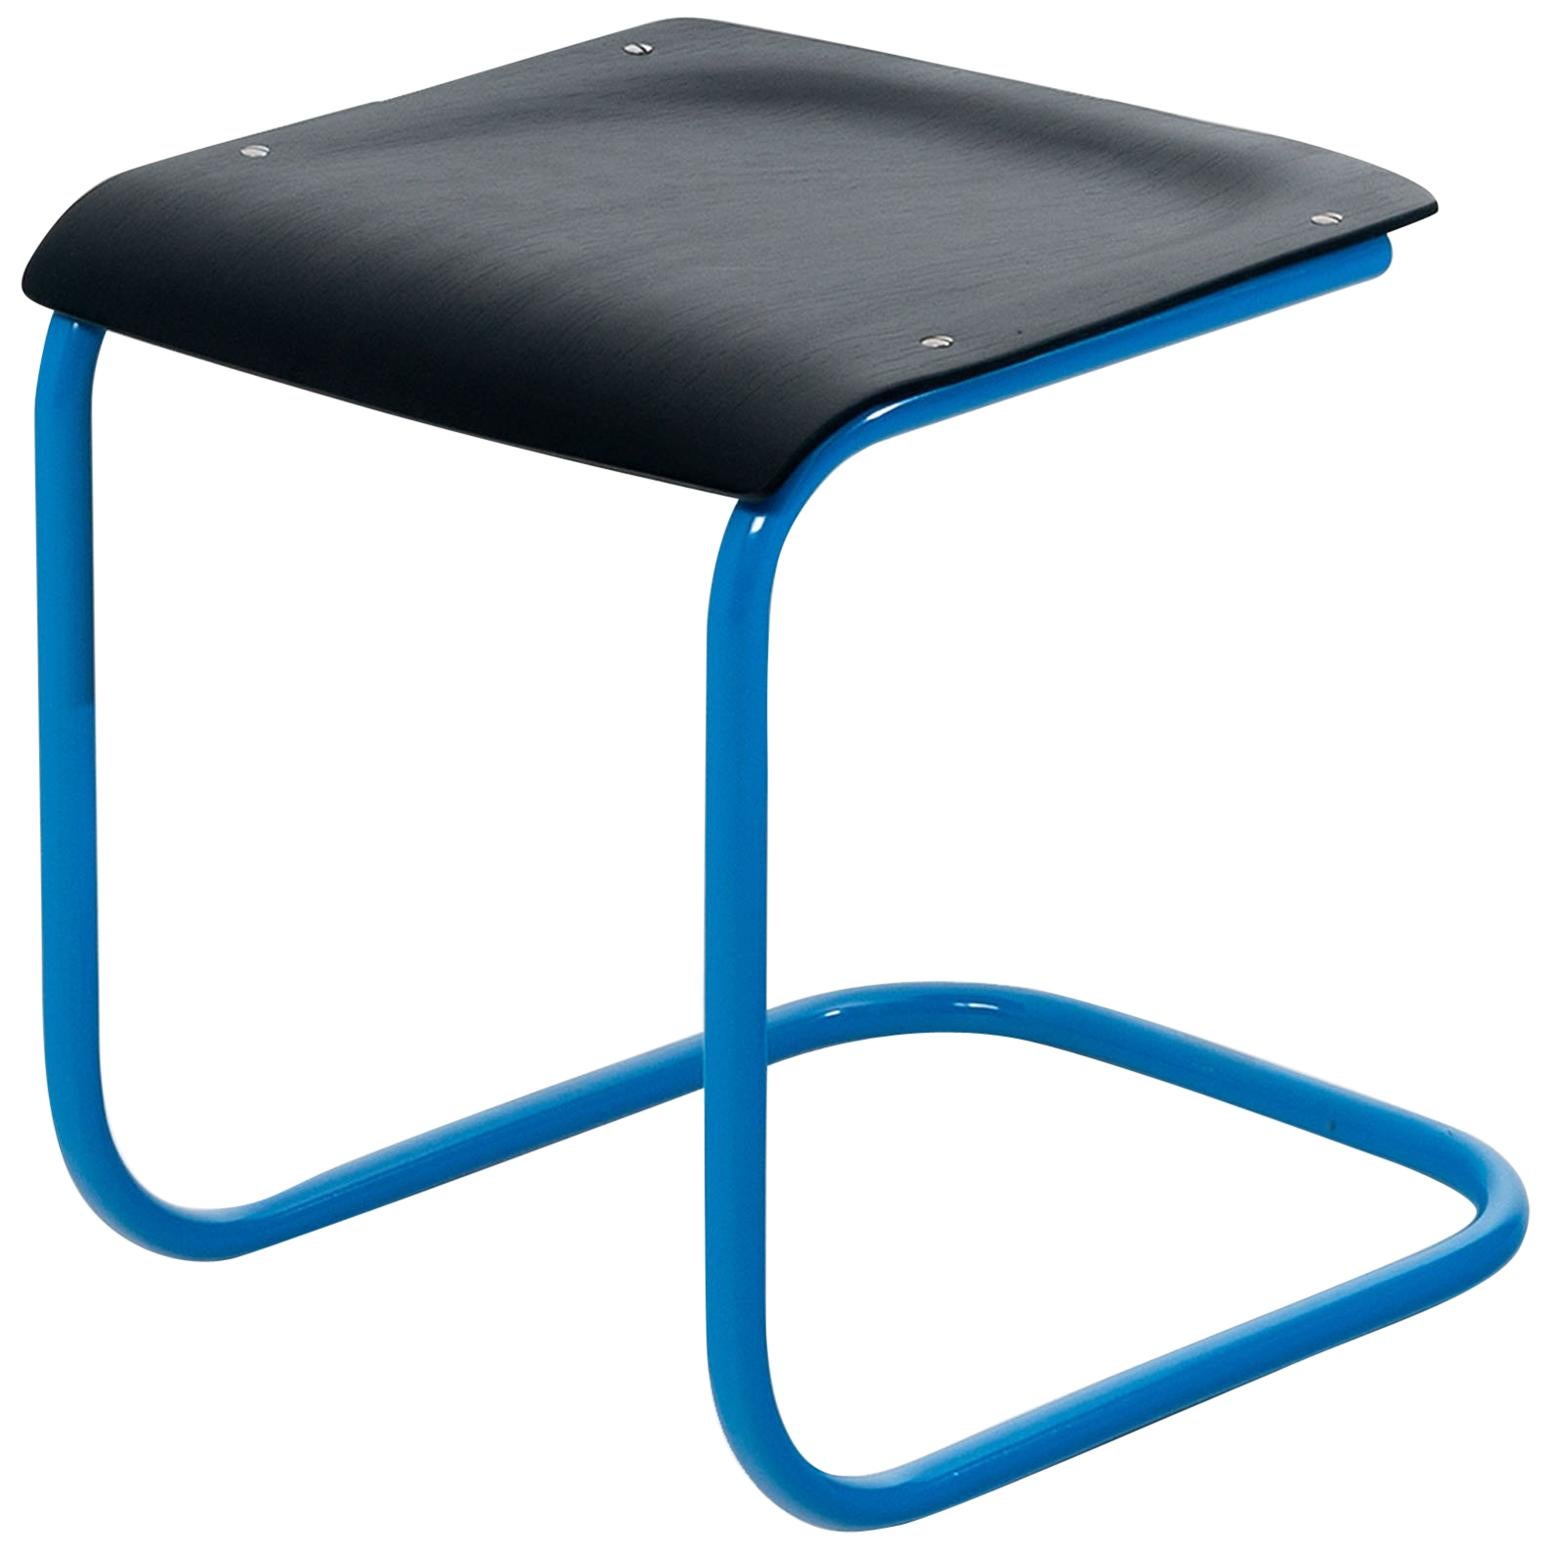 Mart Stam Bauhaus Stool in Black and Blue For Sale